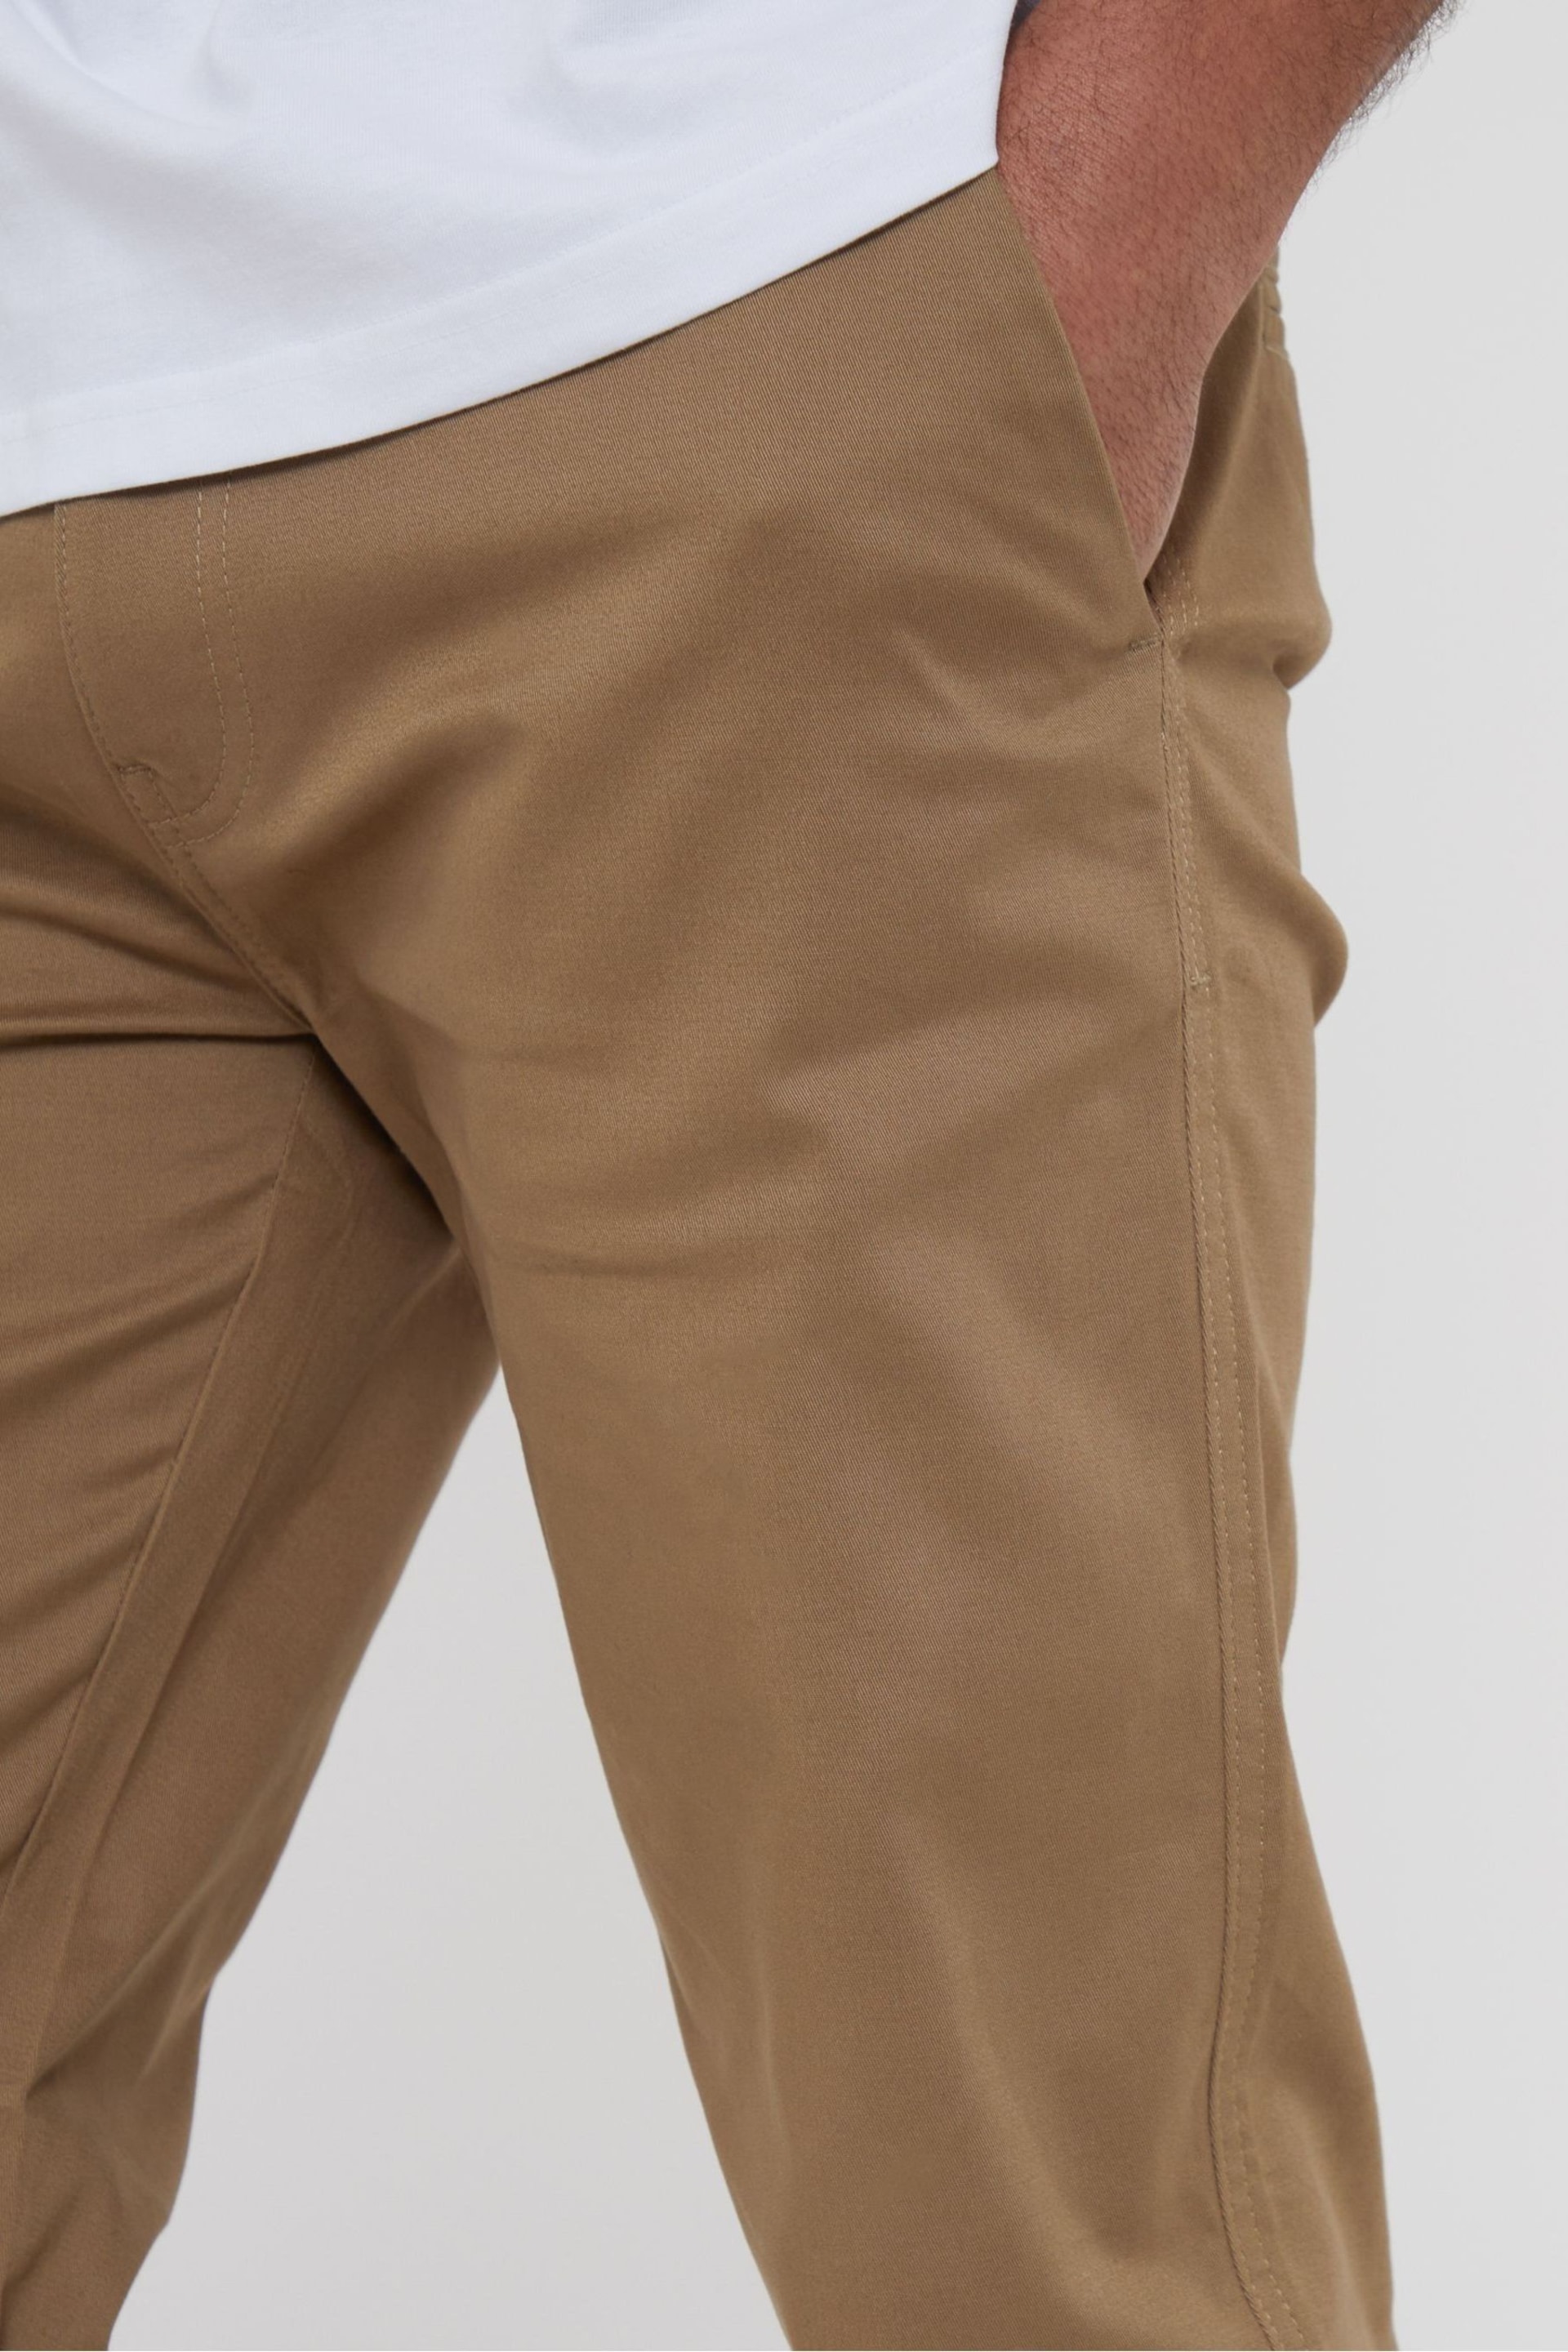 Threadbare Brown Cotton Regular Fit Chino Trousers with Stretch - Image 4 of 4